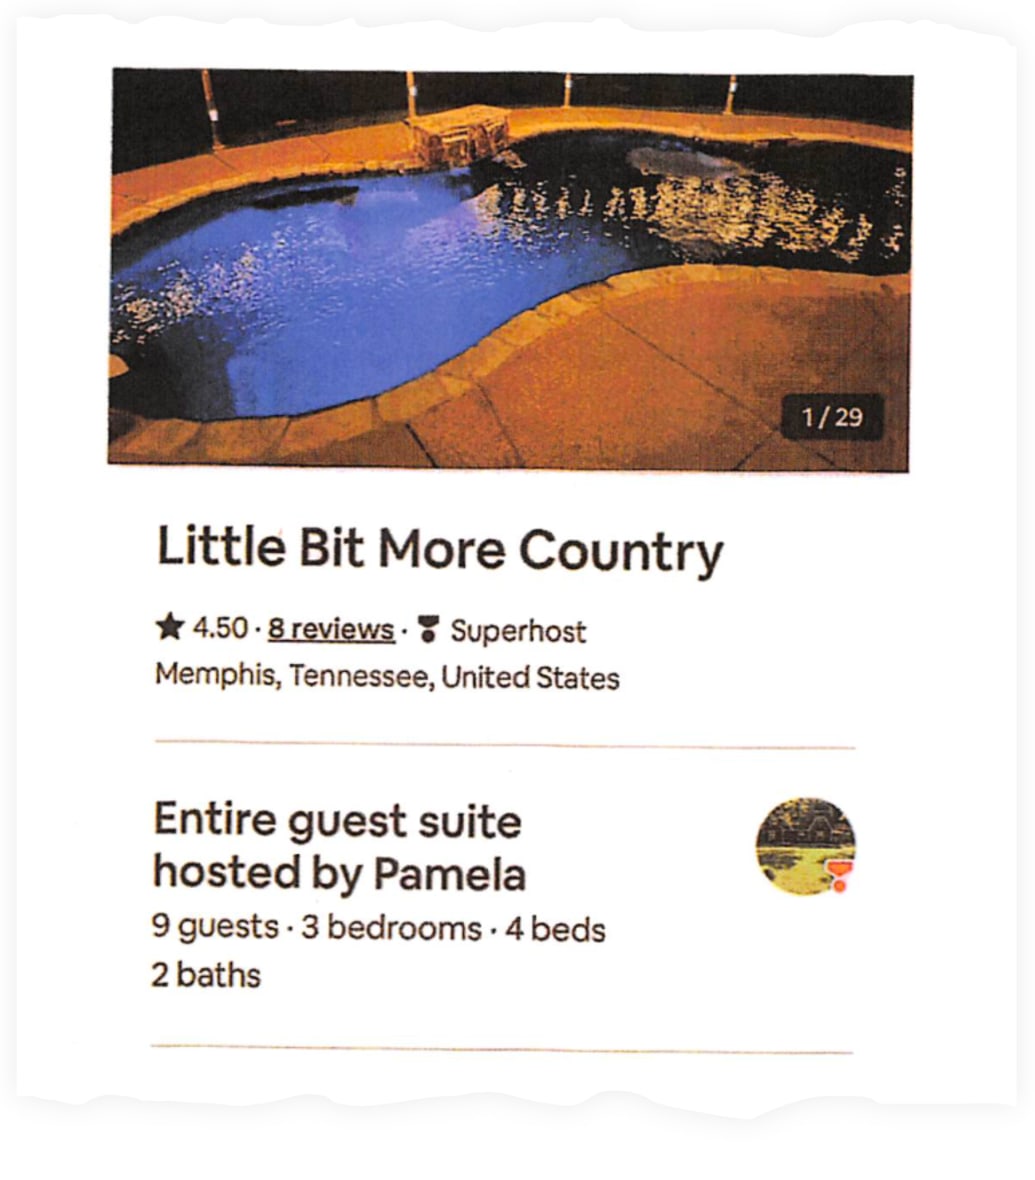 A screenshot of the Airbnb listing Shawn Mackey booked for a weekend with friends.